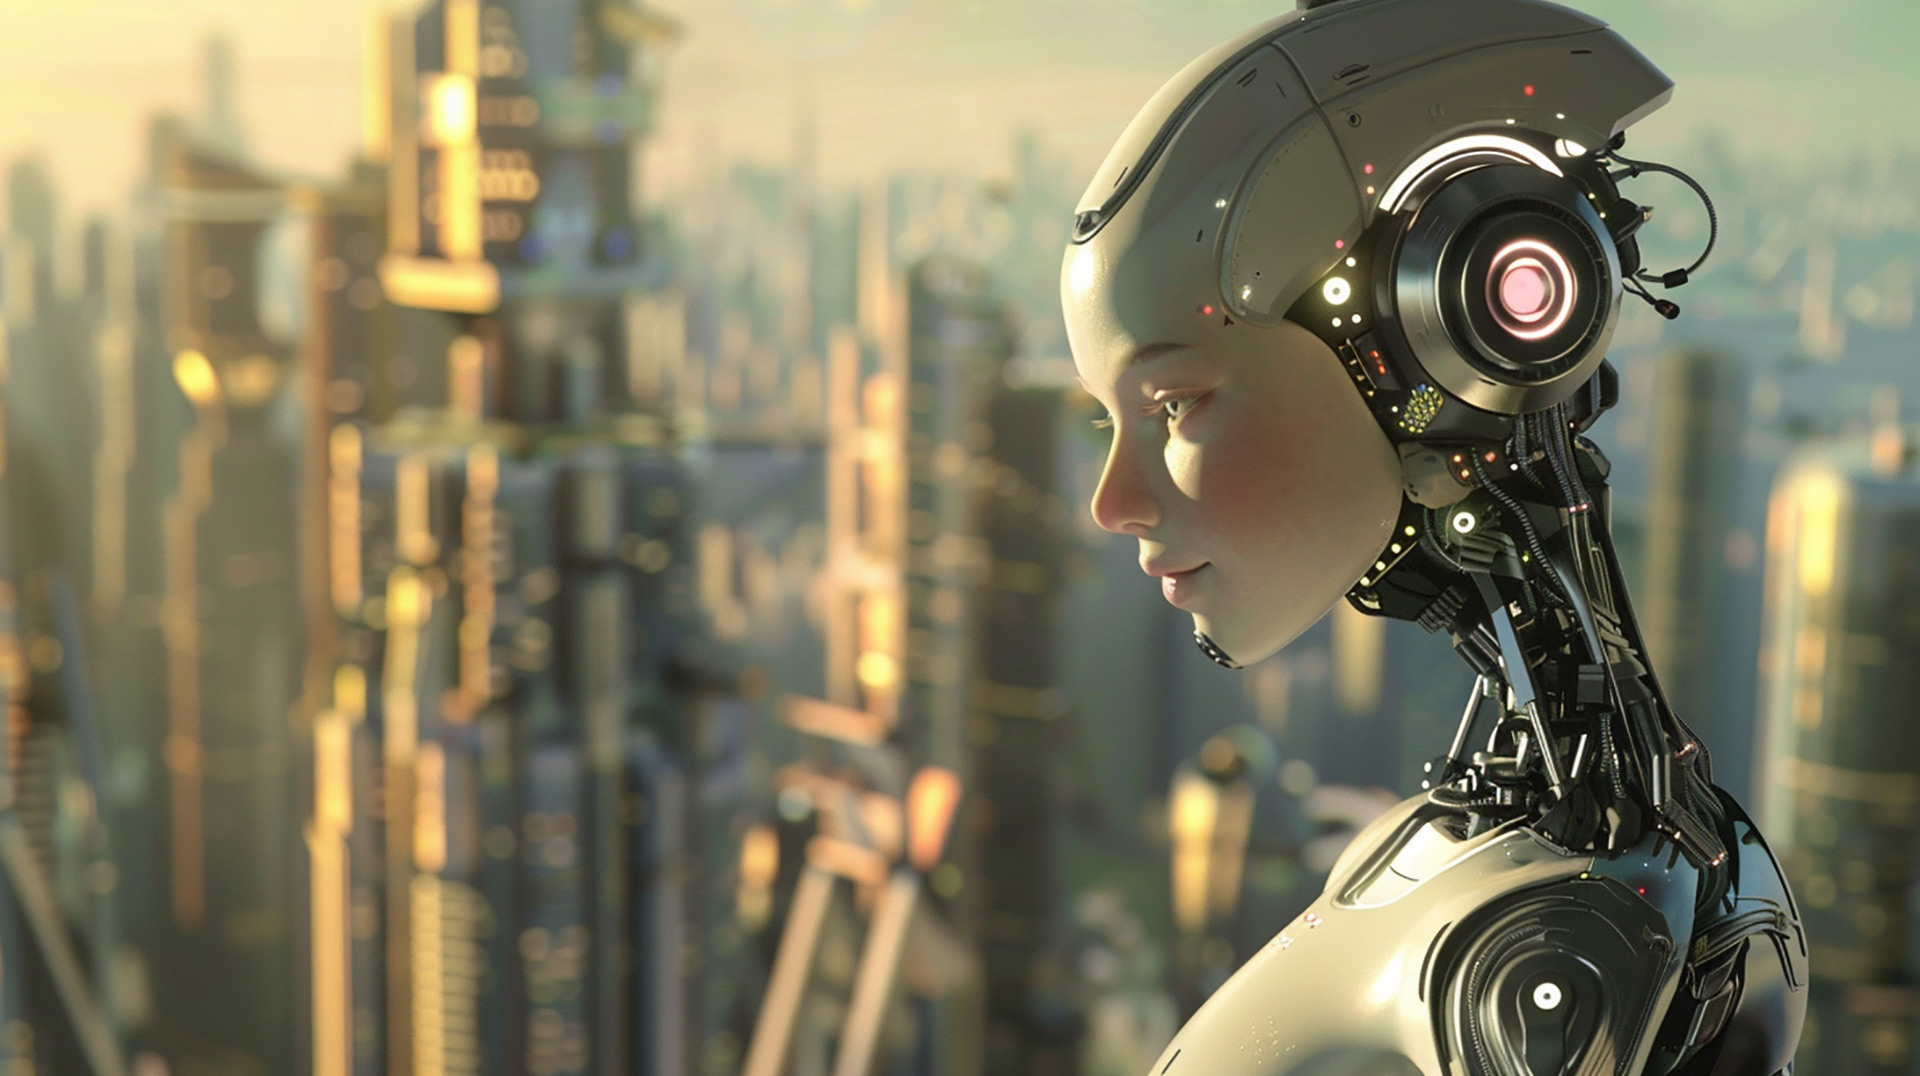 Android Angel: Futuristic Robot Girl Images in 4K